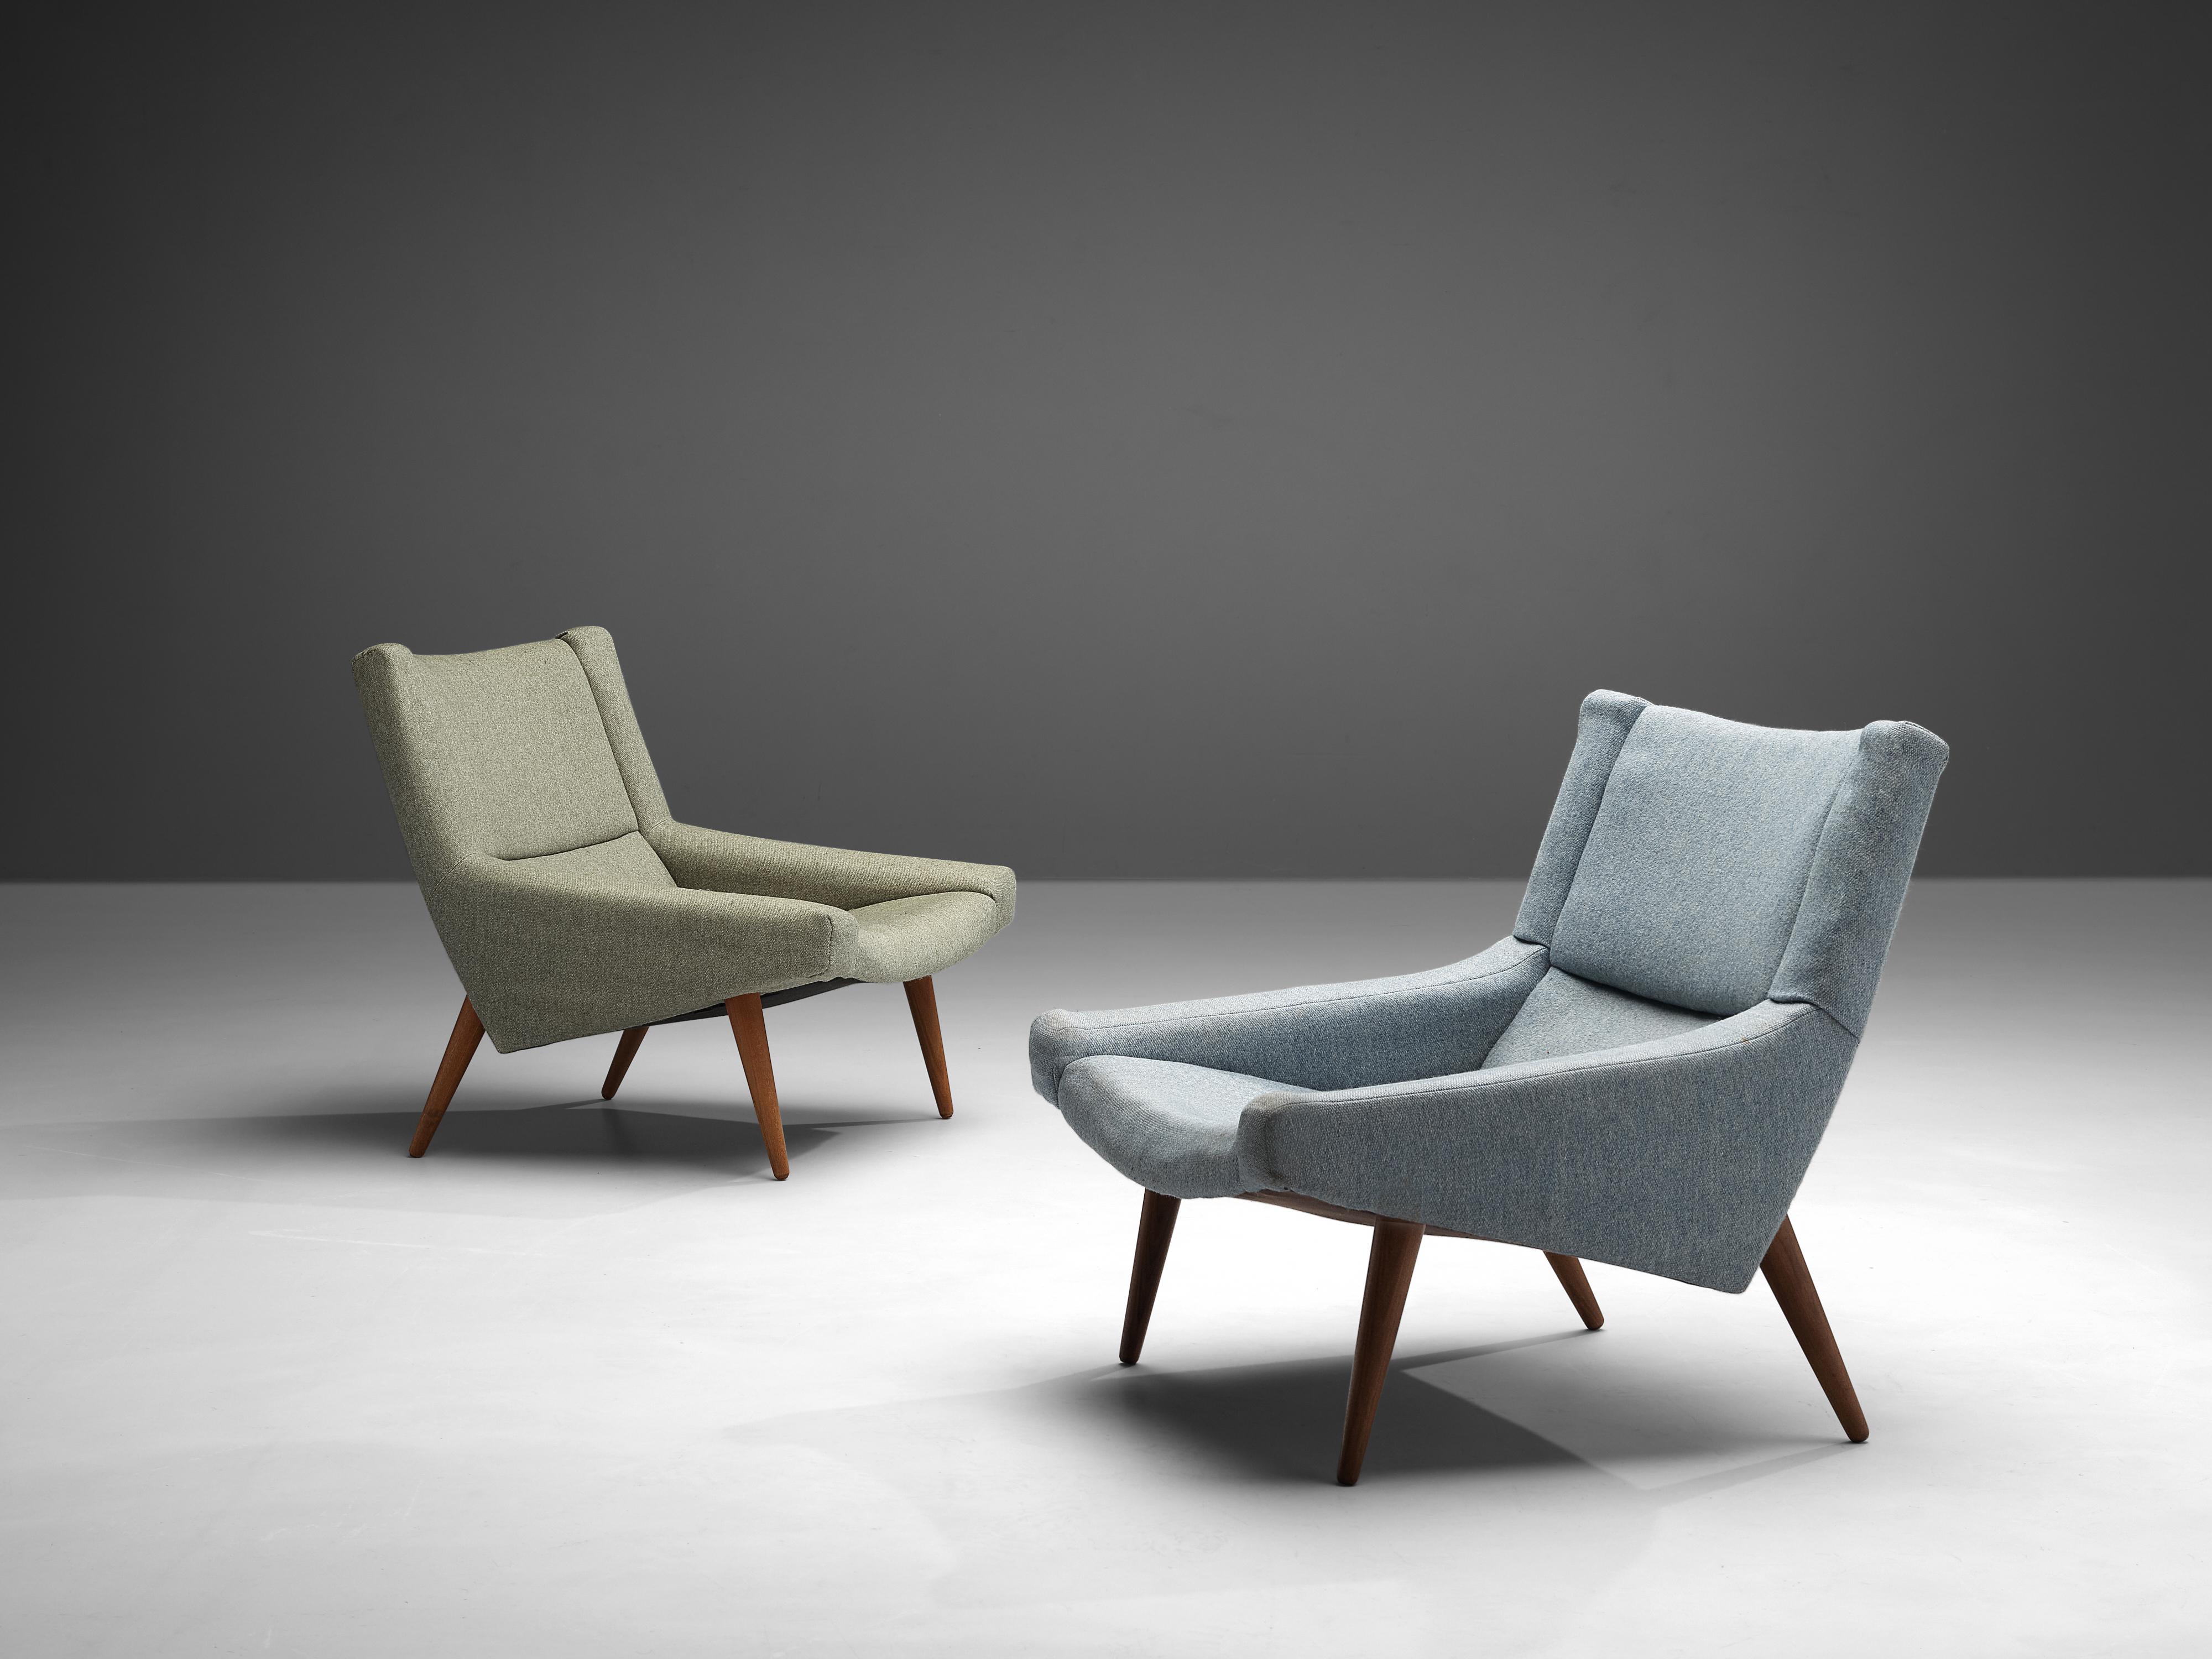 Illum Wikkelsø, pair of lounge chairs, fabric upholstery, wood, Denmark, 1950s

Lovely and comfortable pair of lounge chairs by Danish designer Illum Wikkelsø. The shape of the chair is characterized by the high backrest that floats over into the